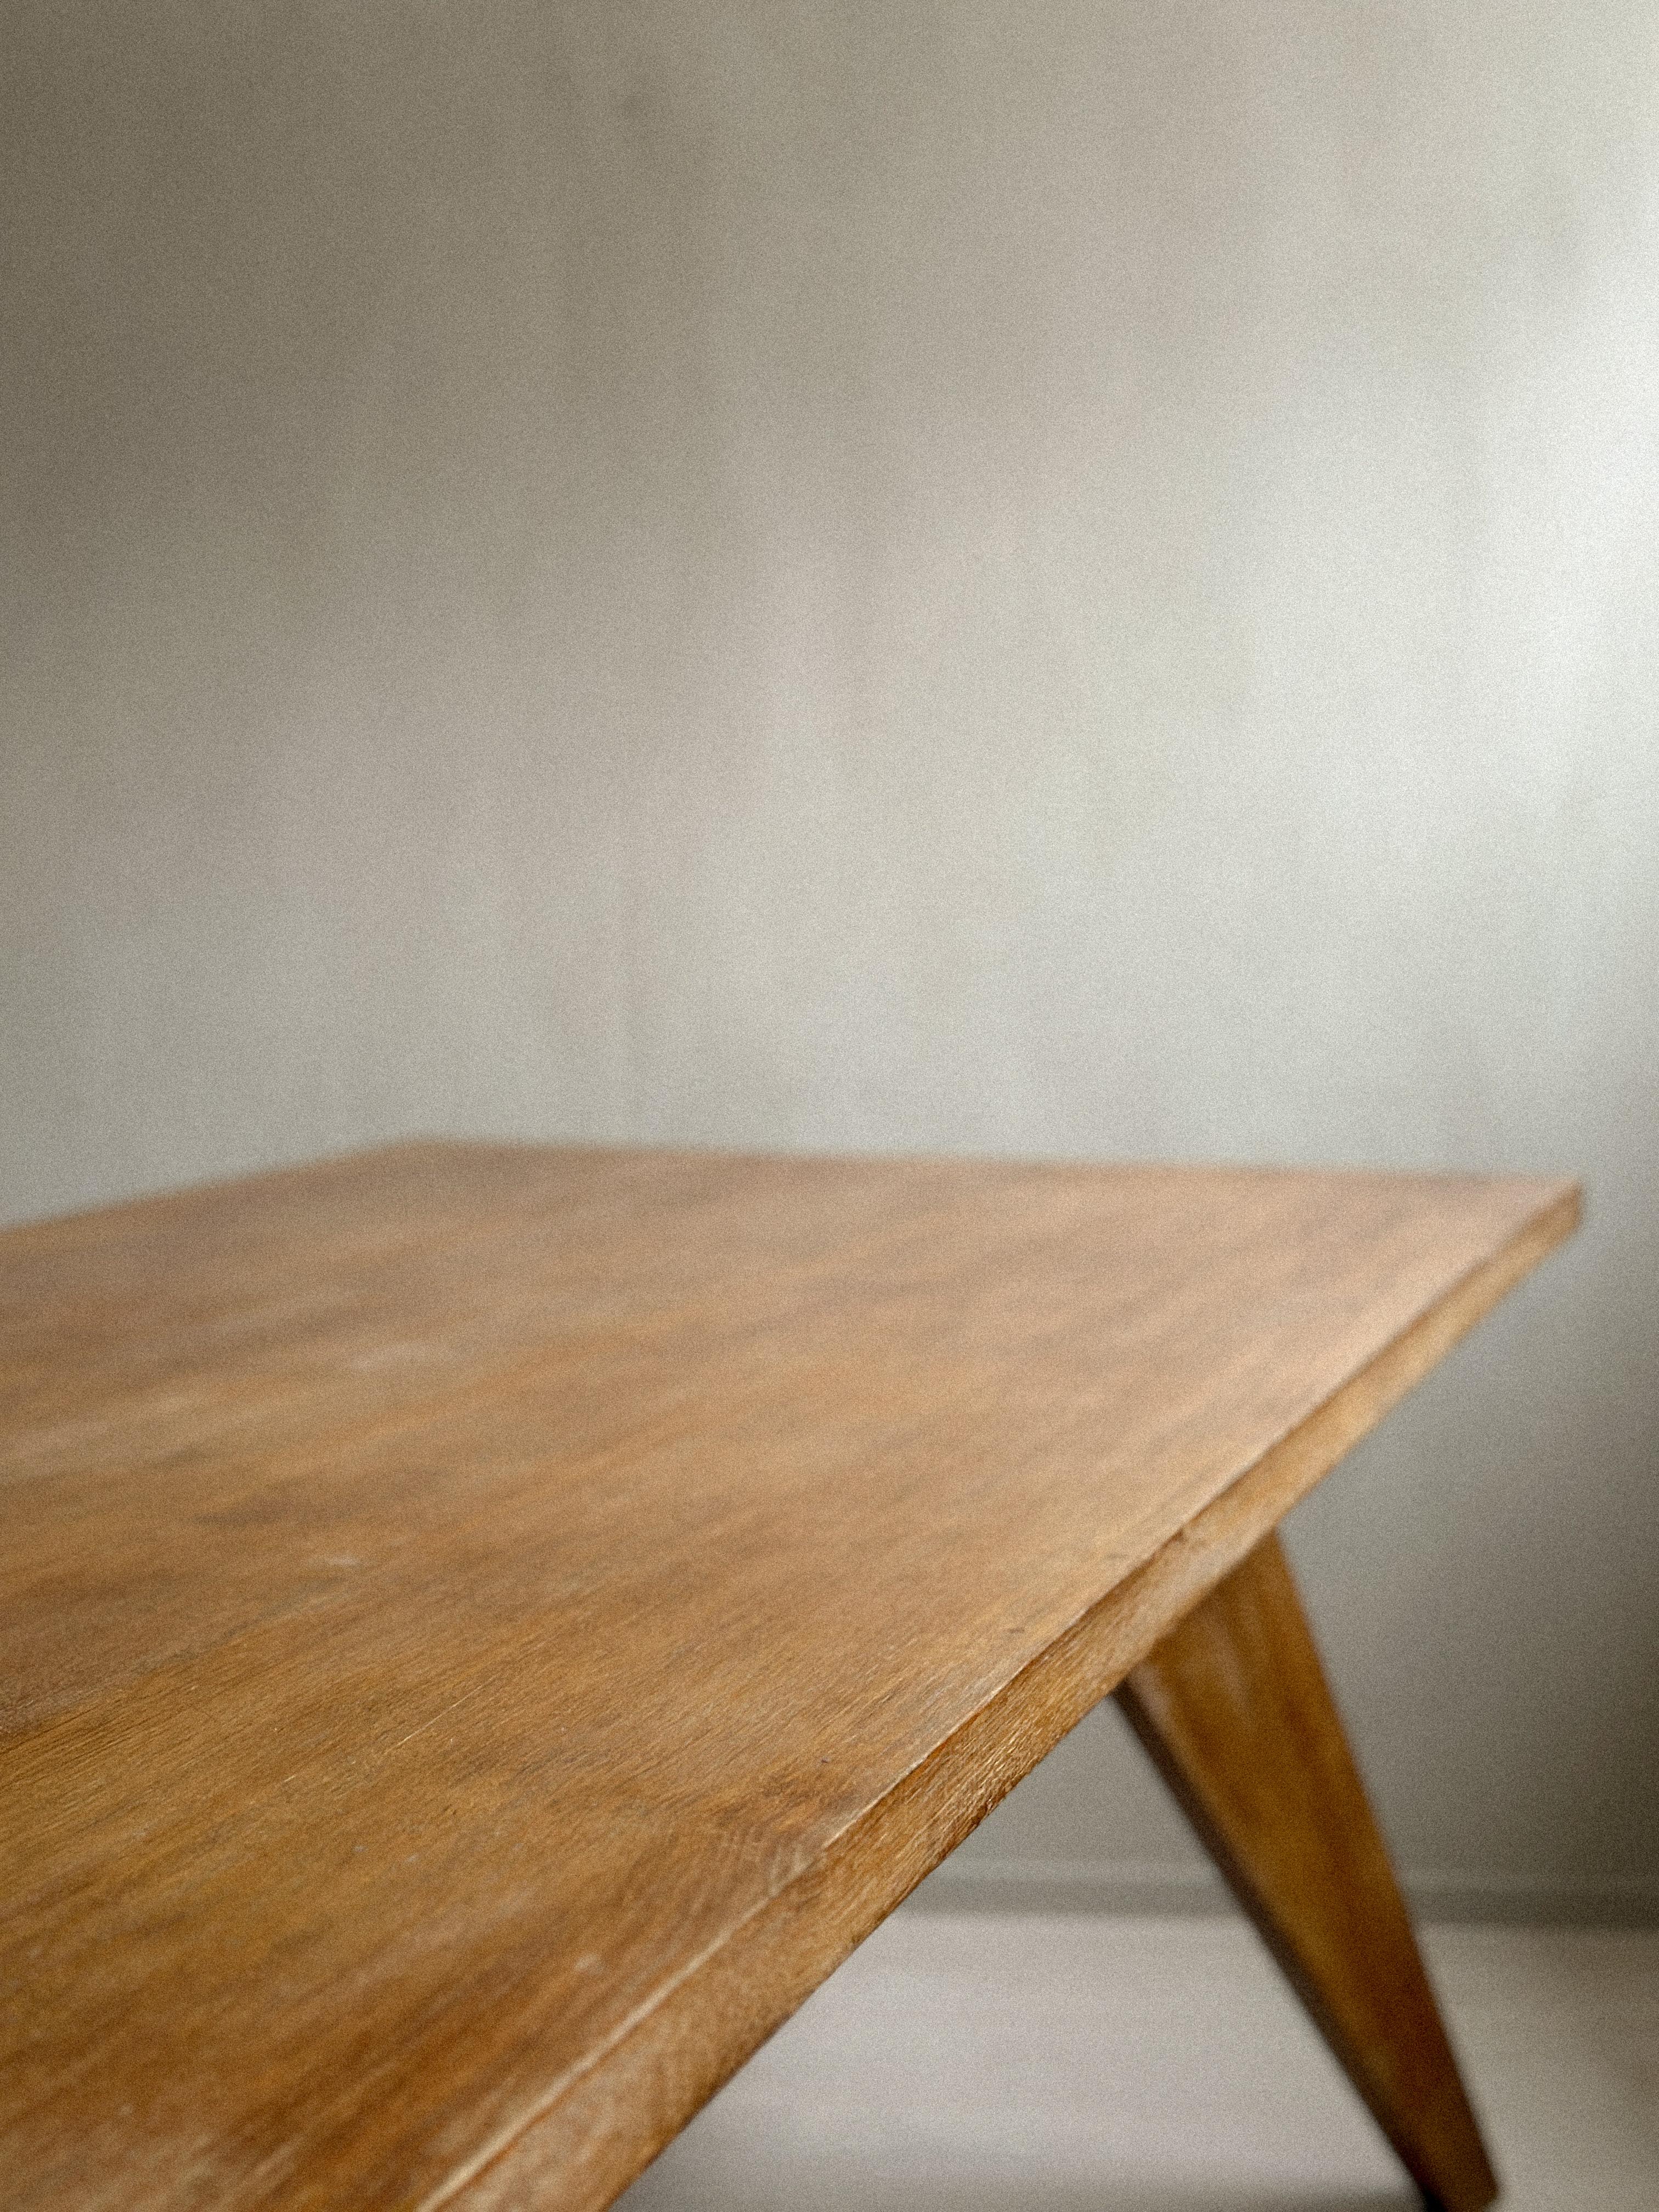 Dining Table in style of Jean Prouvé 